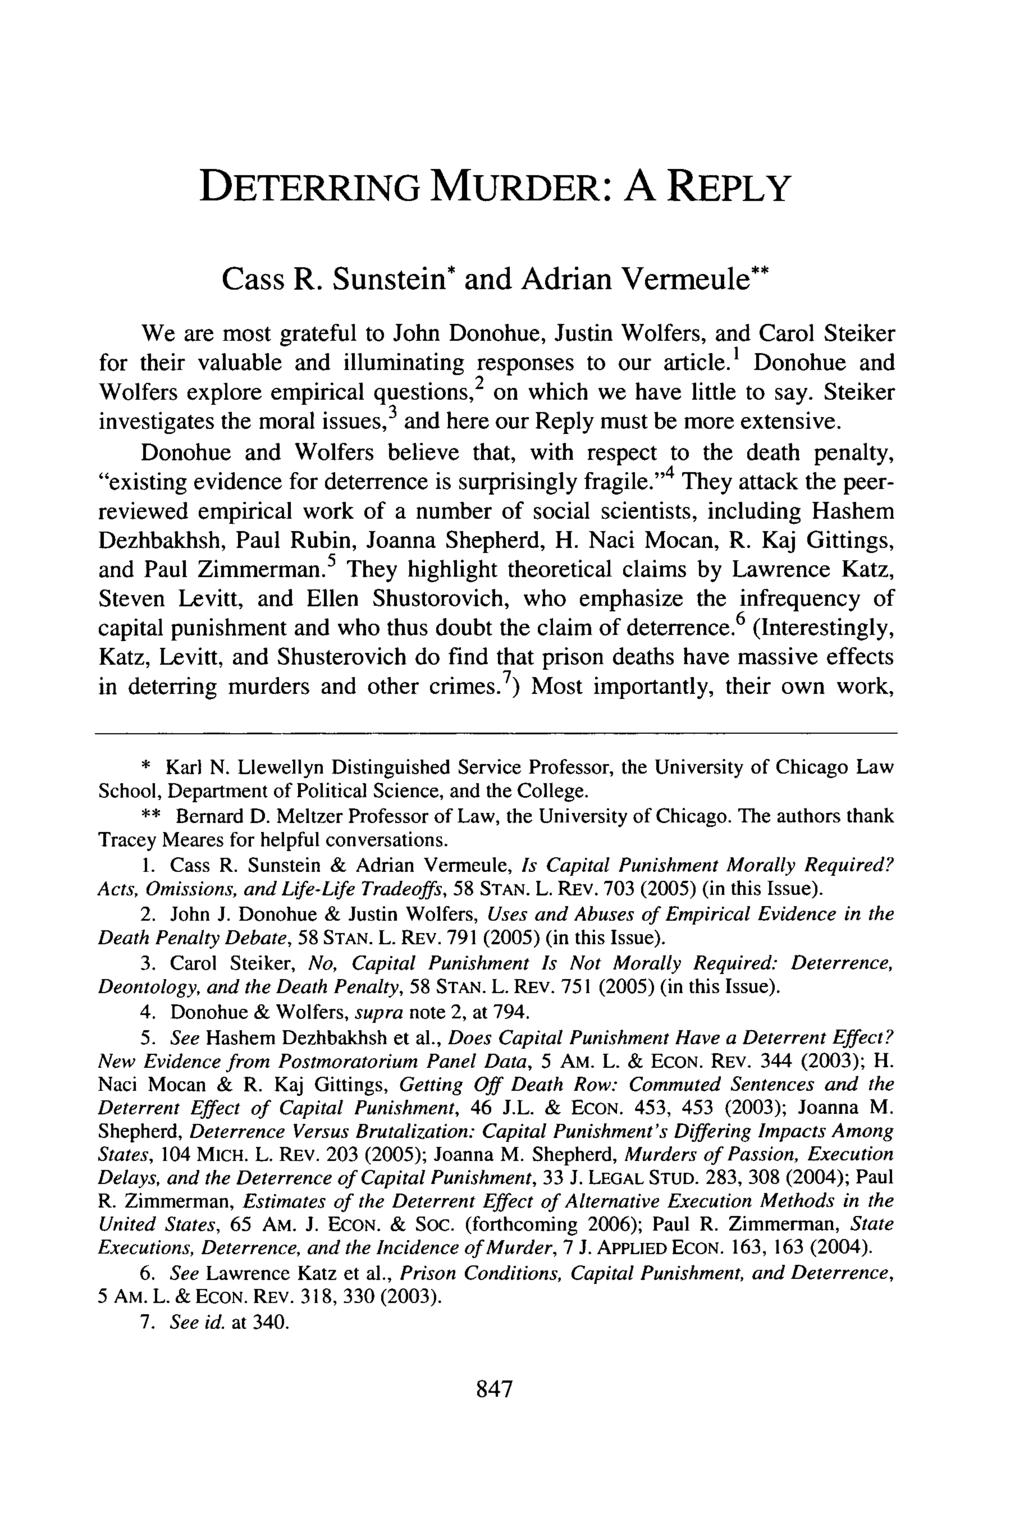 DETERRING MURDER: A REPLY Cass R. Sunstein* and Adrian Vermeule** We are most grateful to John Donohue, Justin Wolfers, and Carol Steiker for their valuable and illuminating responses to our article.